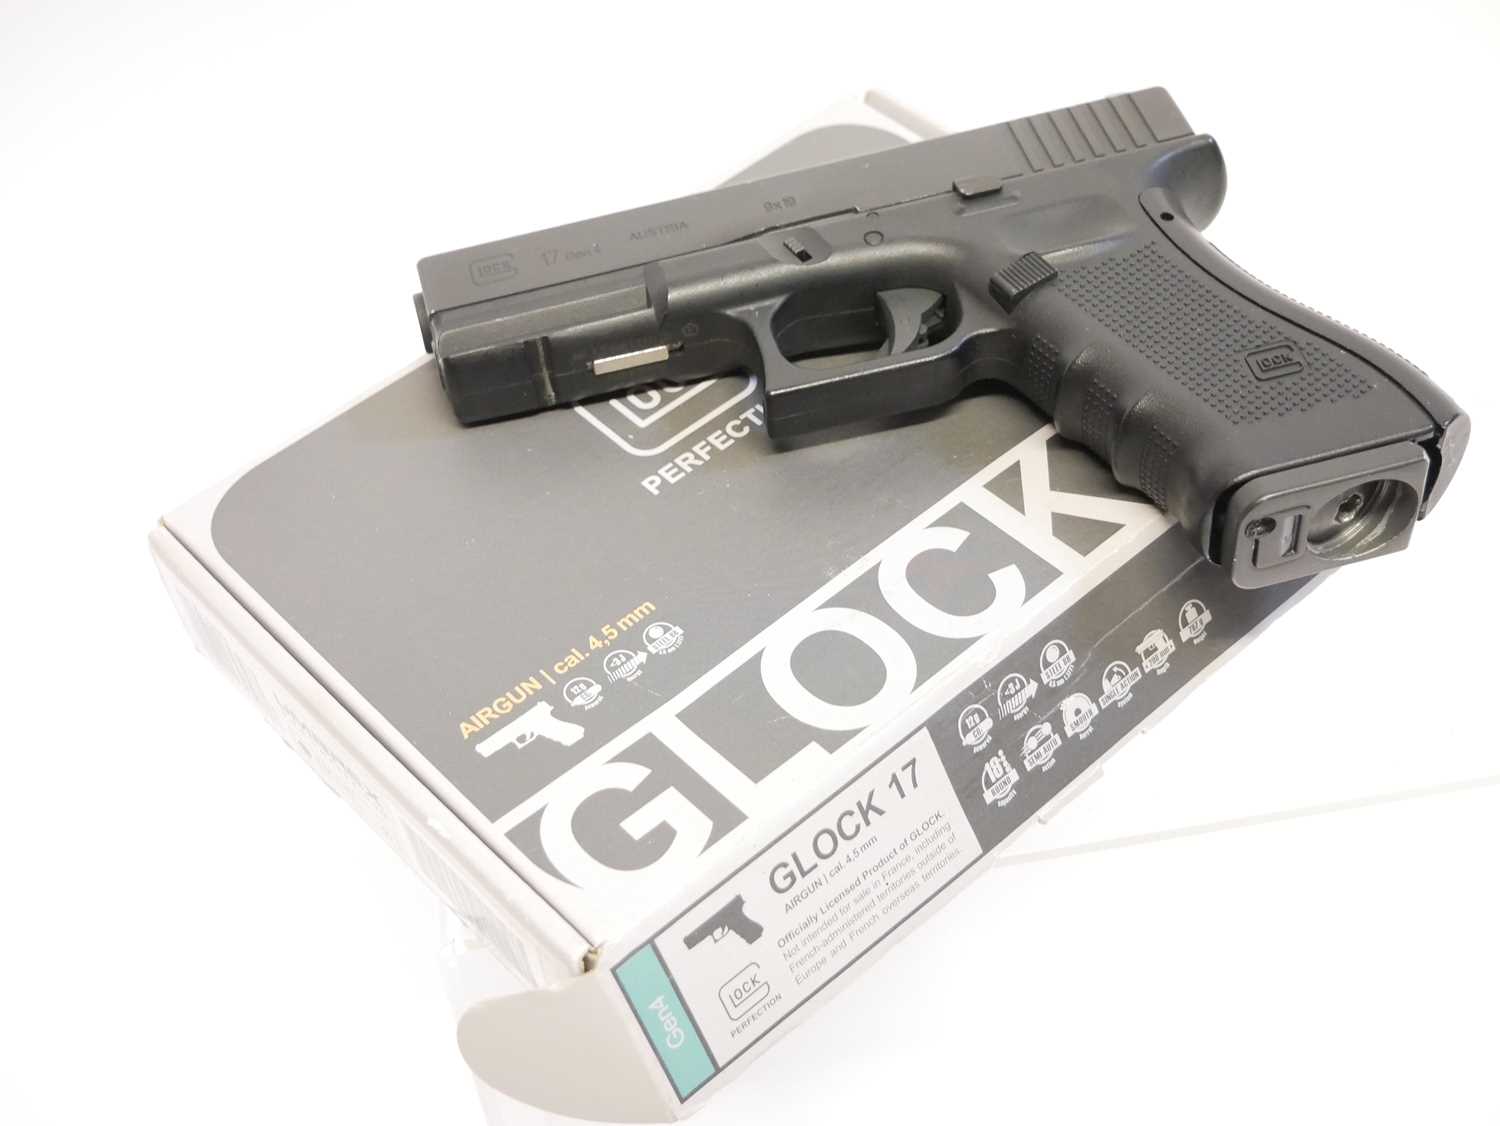 Umarex Glock 17 generation 4 .177 BB CO2 air pistol, serial number KGU417, with box and one - Image 8 of 8